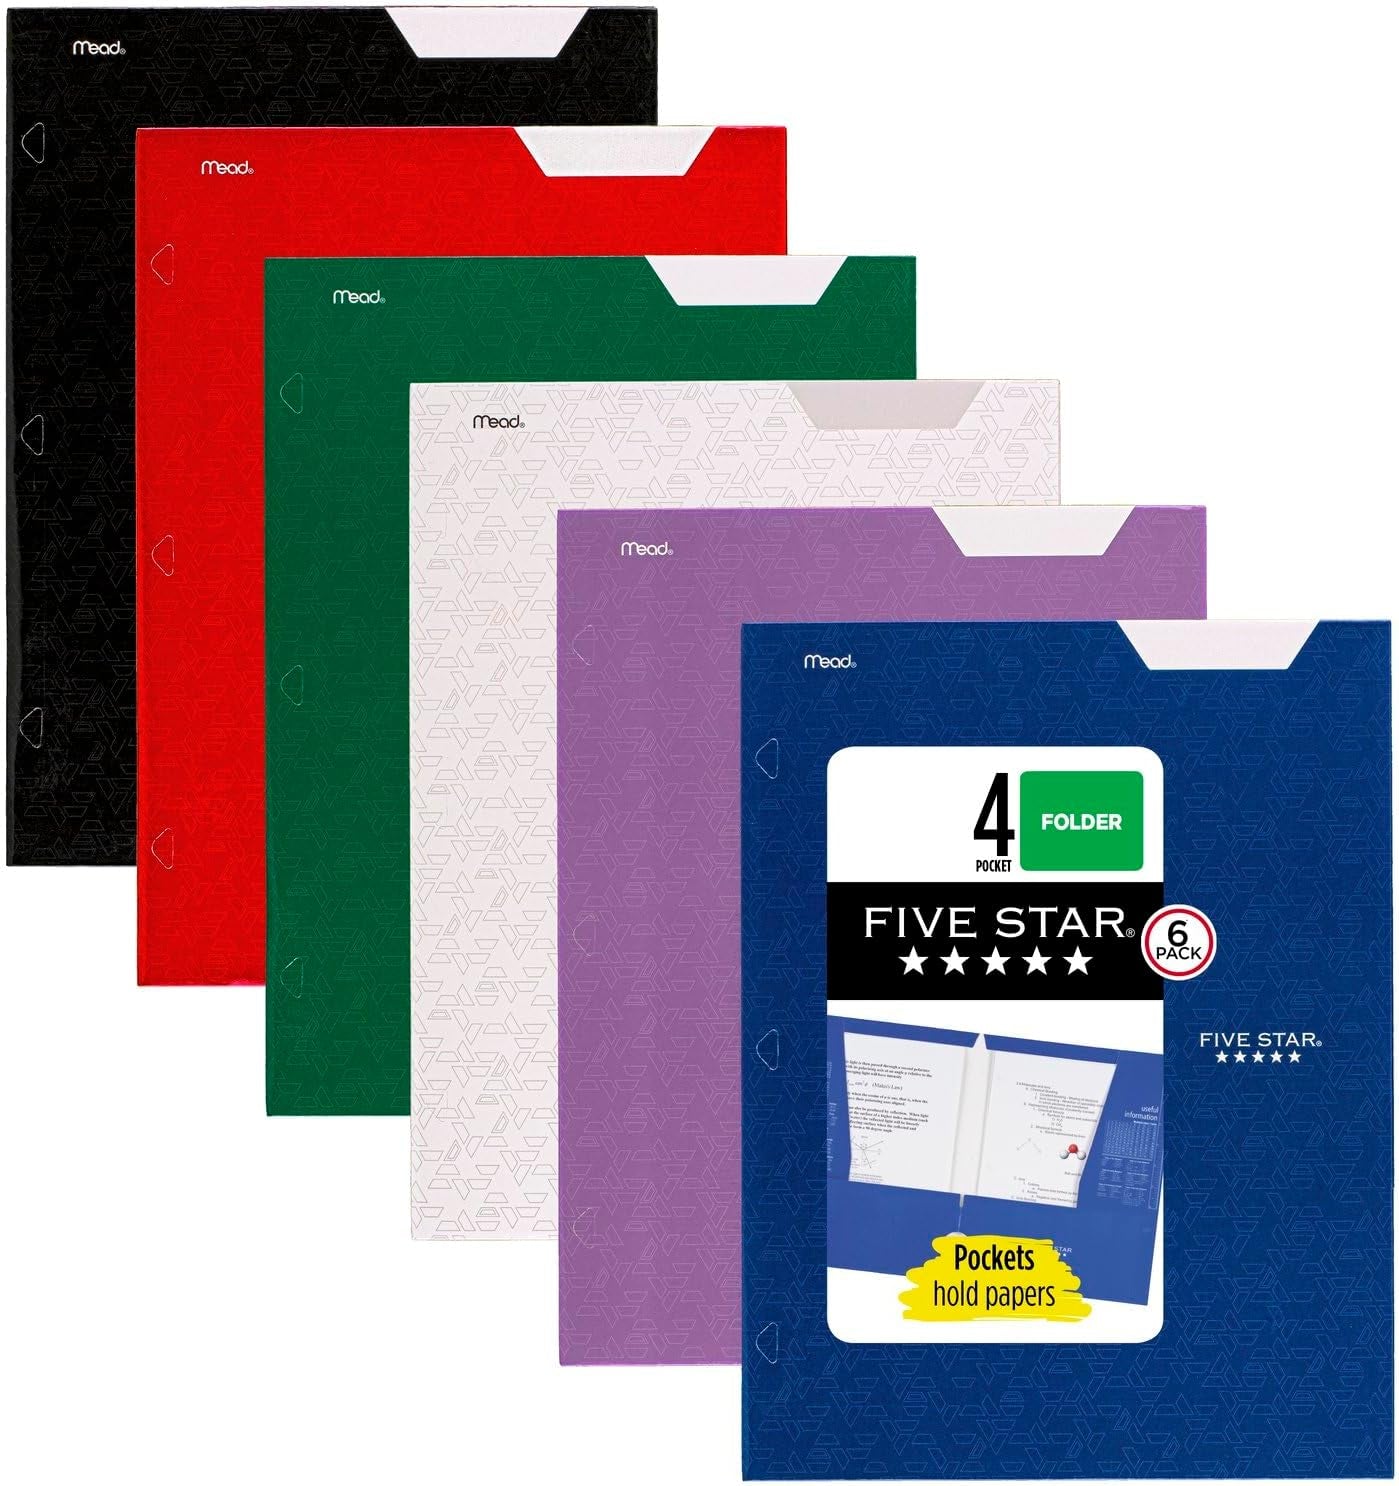 4 Pocket Folders, 6 Pack, Paper Folders, Fits 3-Ring Binders, Holds 8-1/2" X 11" Paper, Writable Label, Black, Fire Red, Forest Green, Pacific Blue, White, Amethyst Purple (38058)